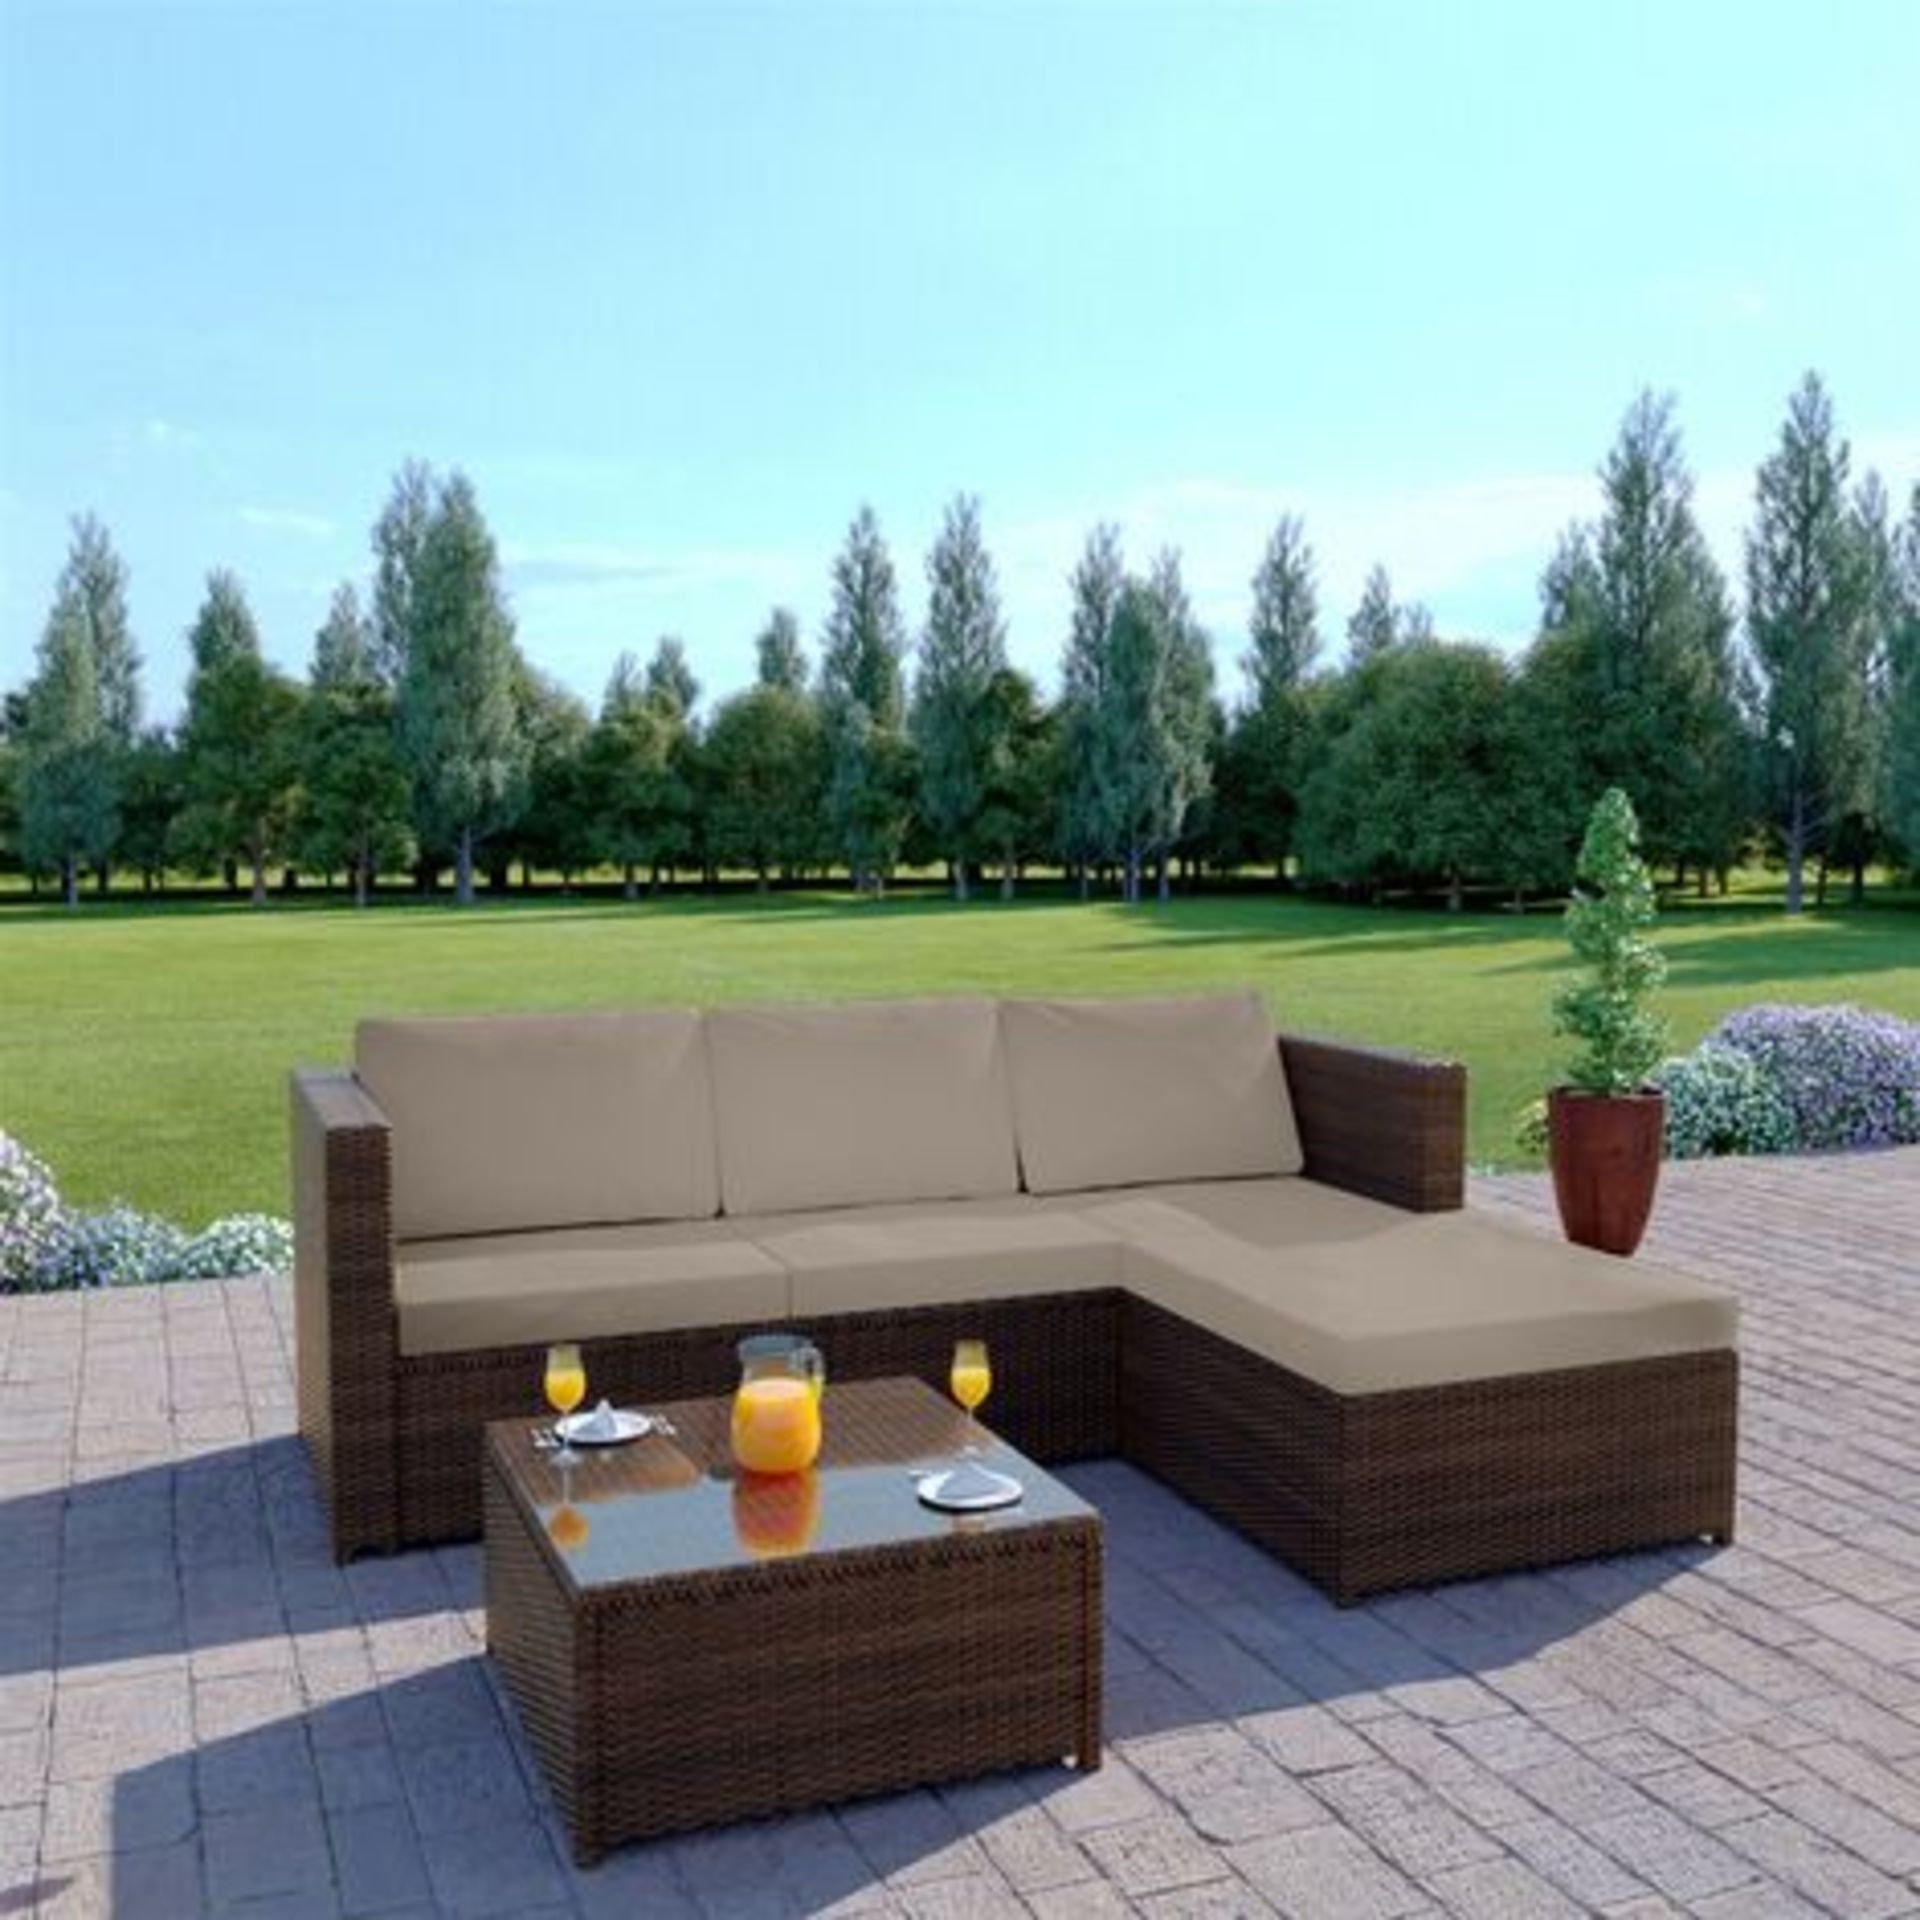 Brand New Rattan Garden Corner Sofa And Drinks Table Patio Furniture Set INCLUDES OUTDOOR PROTECTIVE